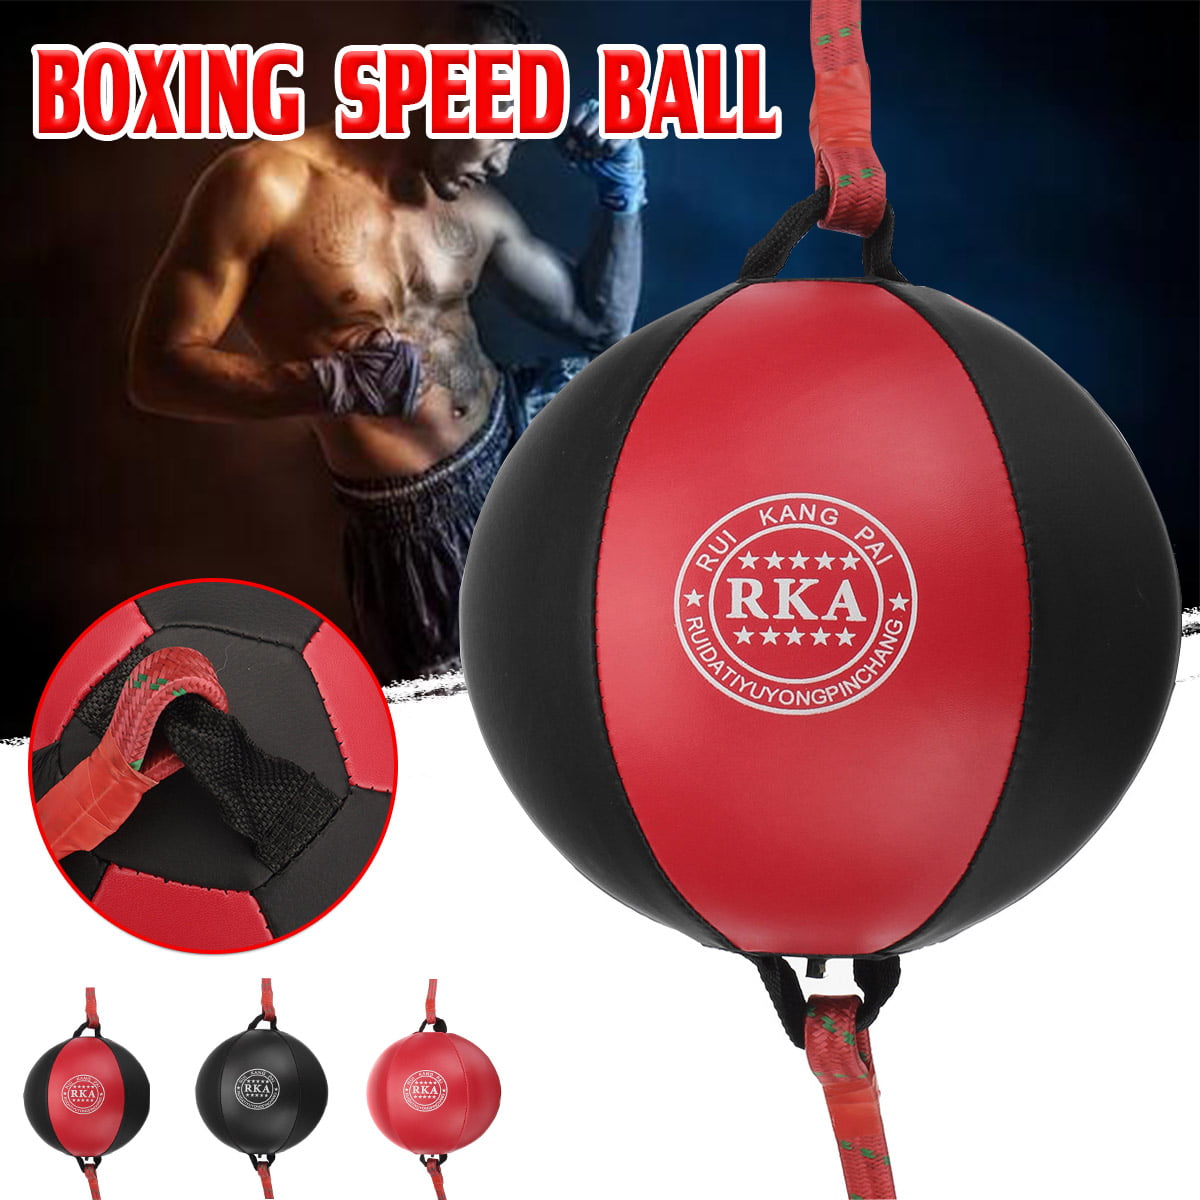 Speed Ball Leather Punch Bag Hanging Double End Ball Boxing Punching Ball with Boxing Reflex Ball and Pump for Gym MMA Boxing Sports Punch Bag Adult Kids Men Women 